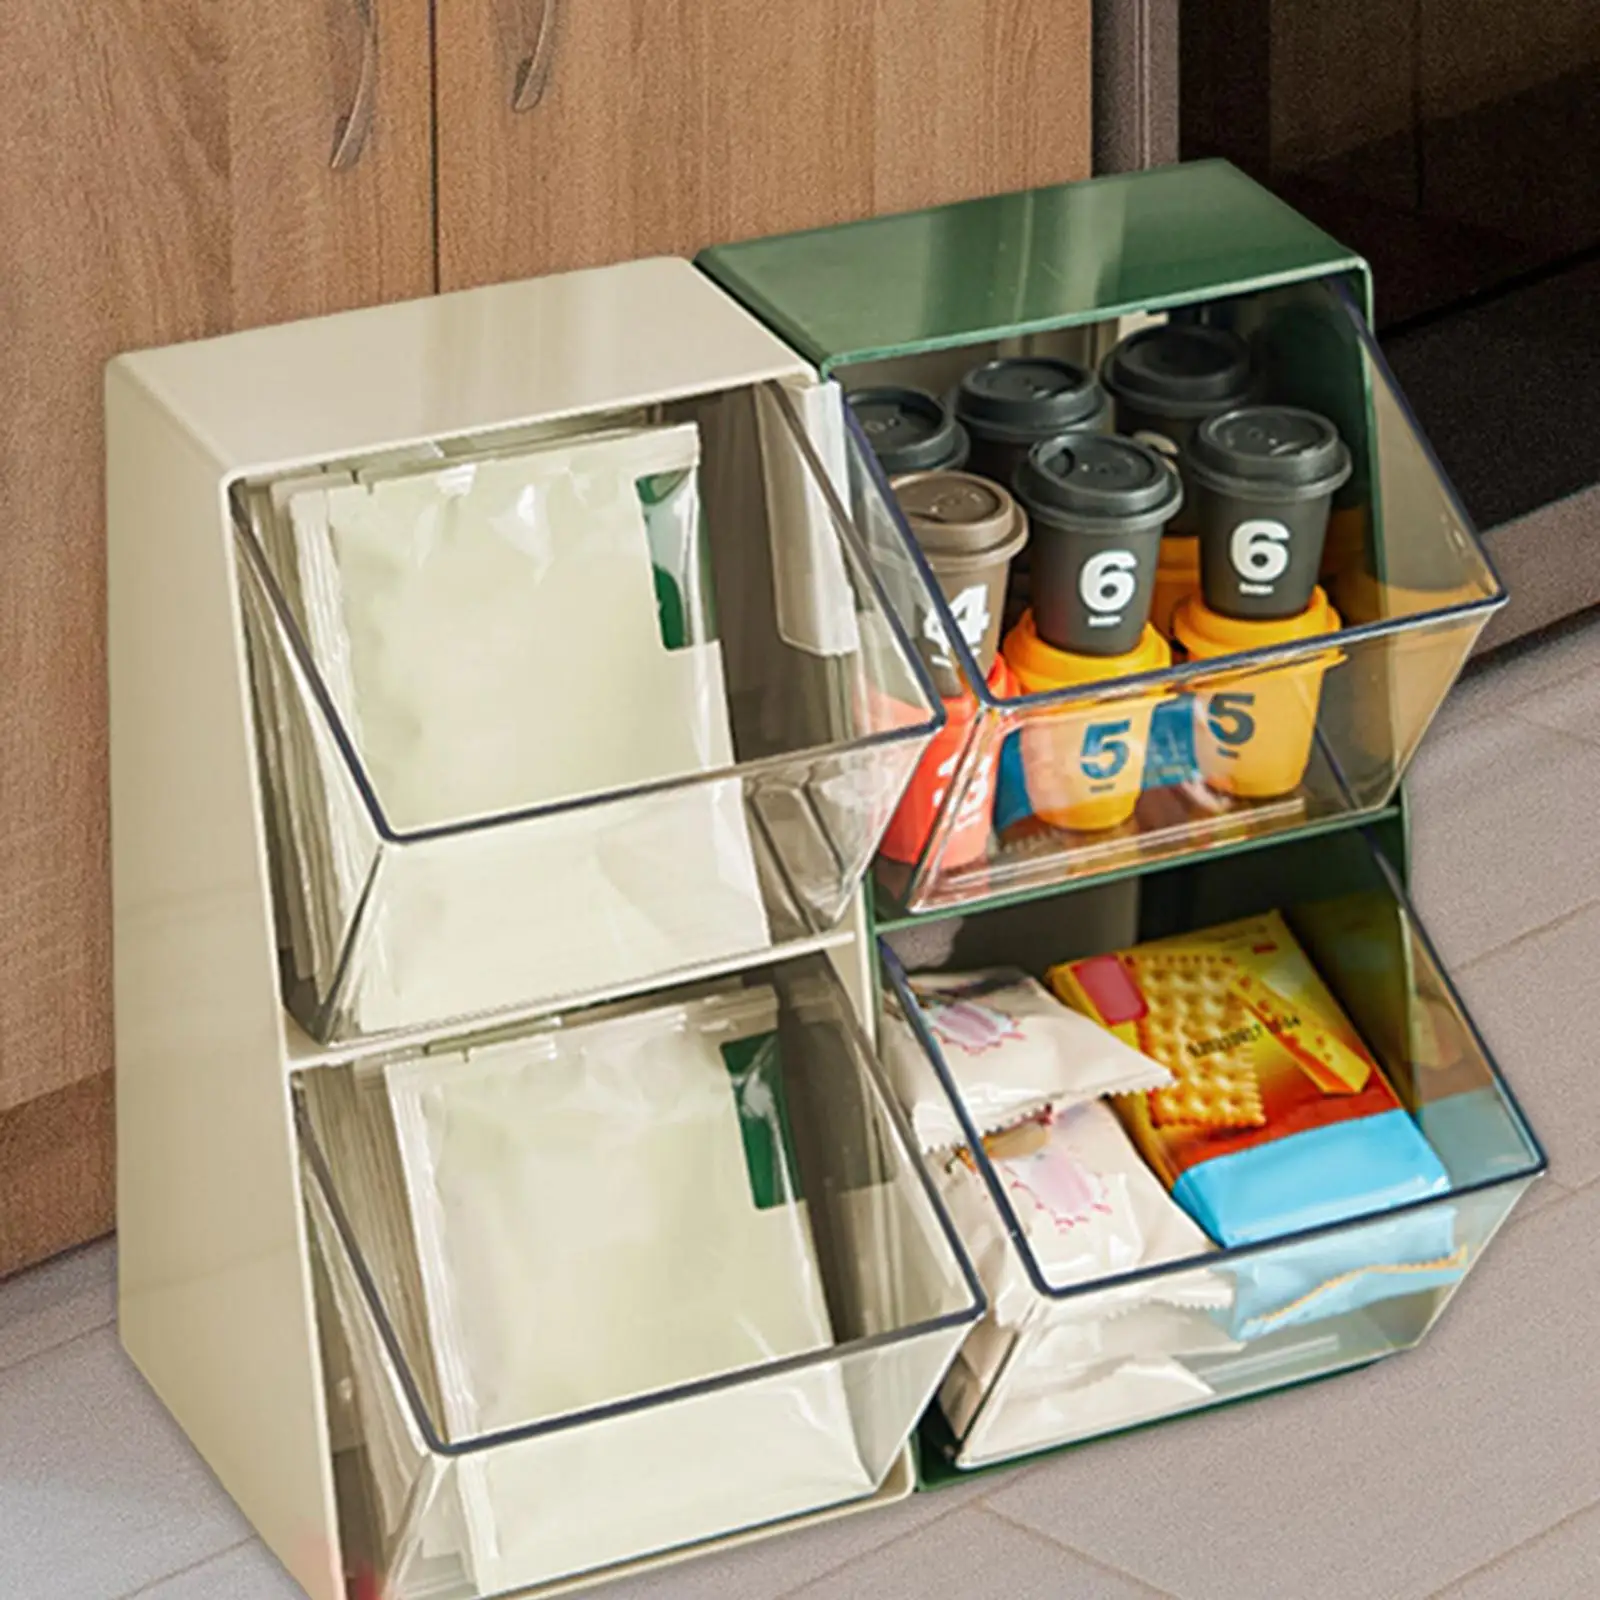 Large Capacity Tea Box Storage Tea Holder Rack Multifunctional Transparent for Creamers Condiments Spices Home Office Bedroom